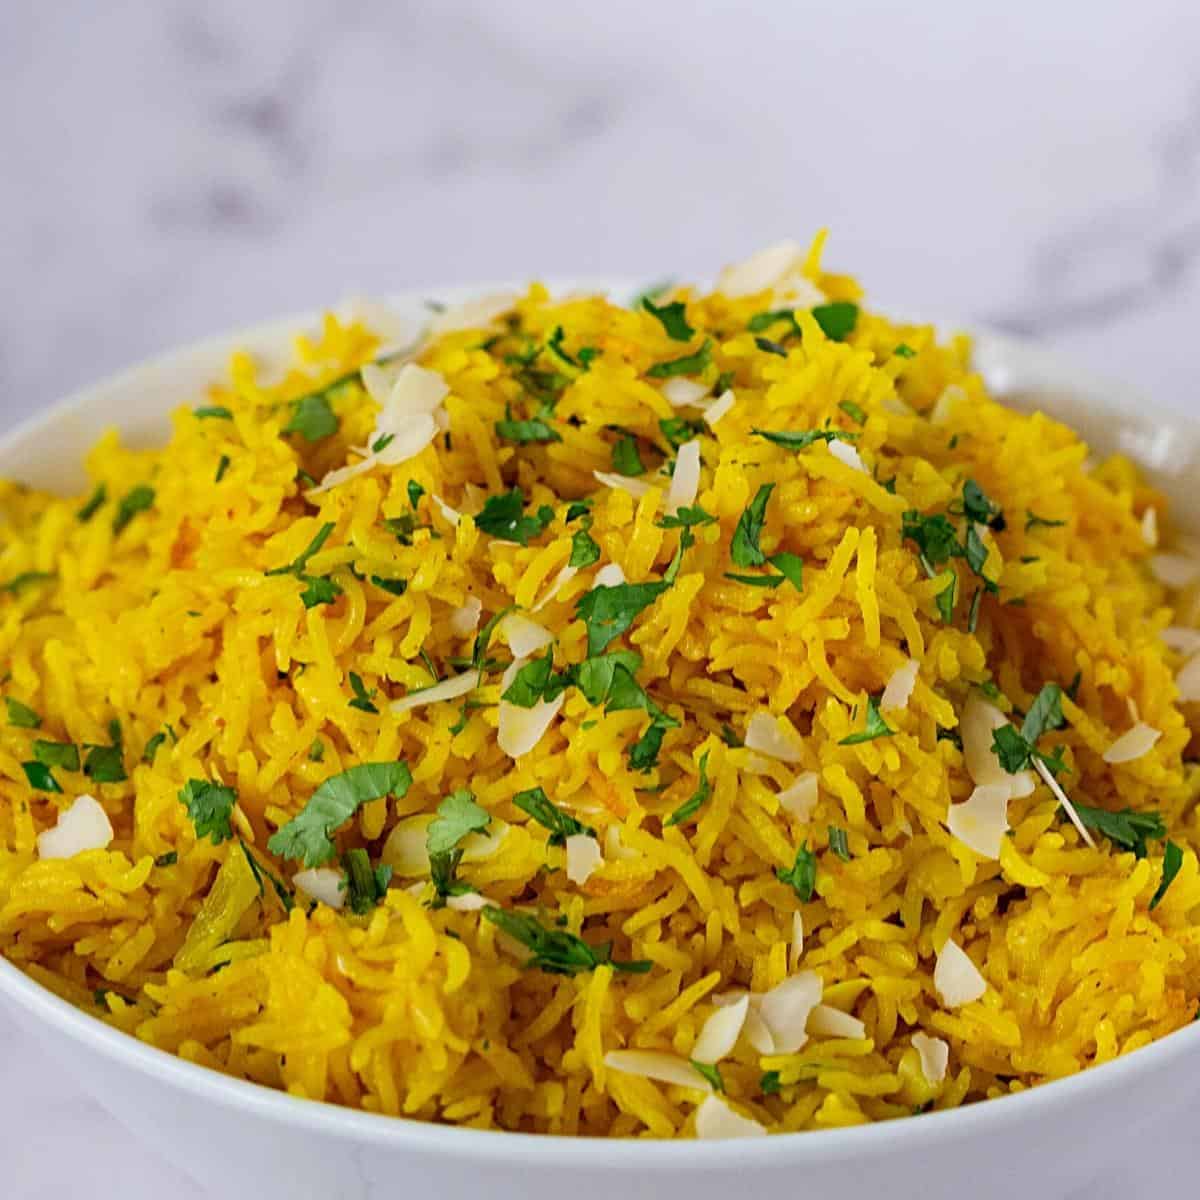 A bowl with flavored yellow rice with coconut milk.